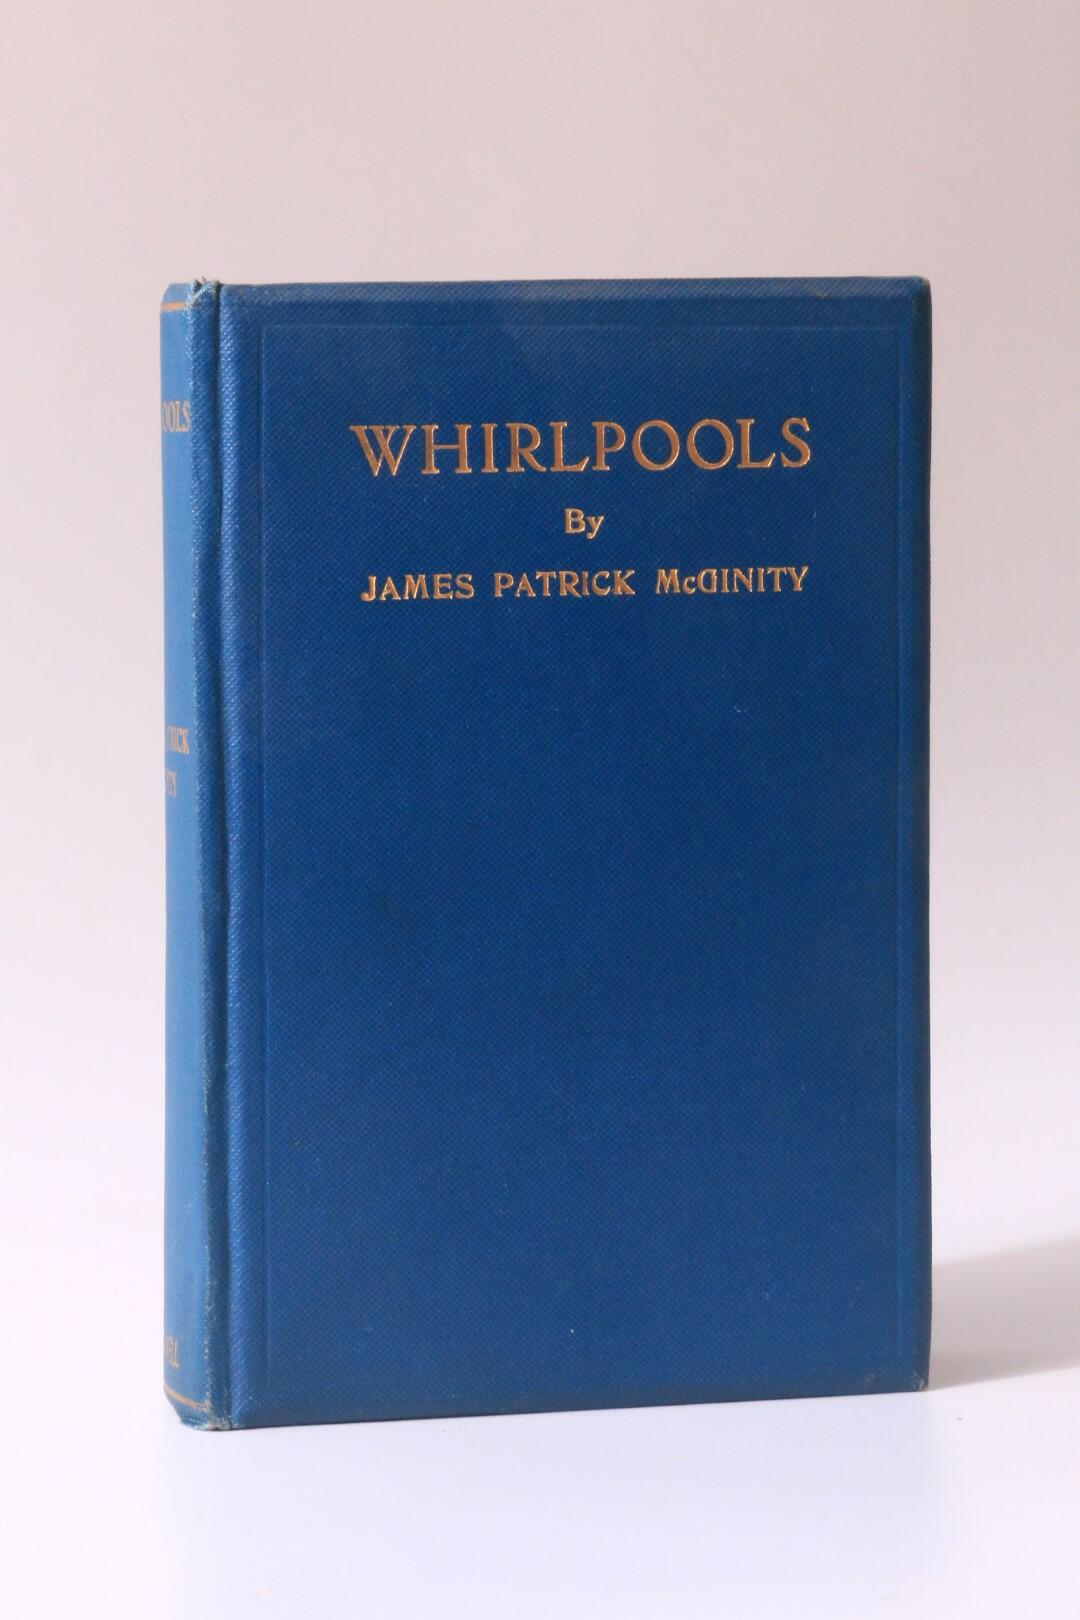 James Patrick McGinity - Whirlpools - Arthur H. Stockwell, n.d. [1925], Signed First Edition.